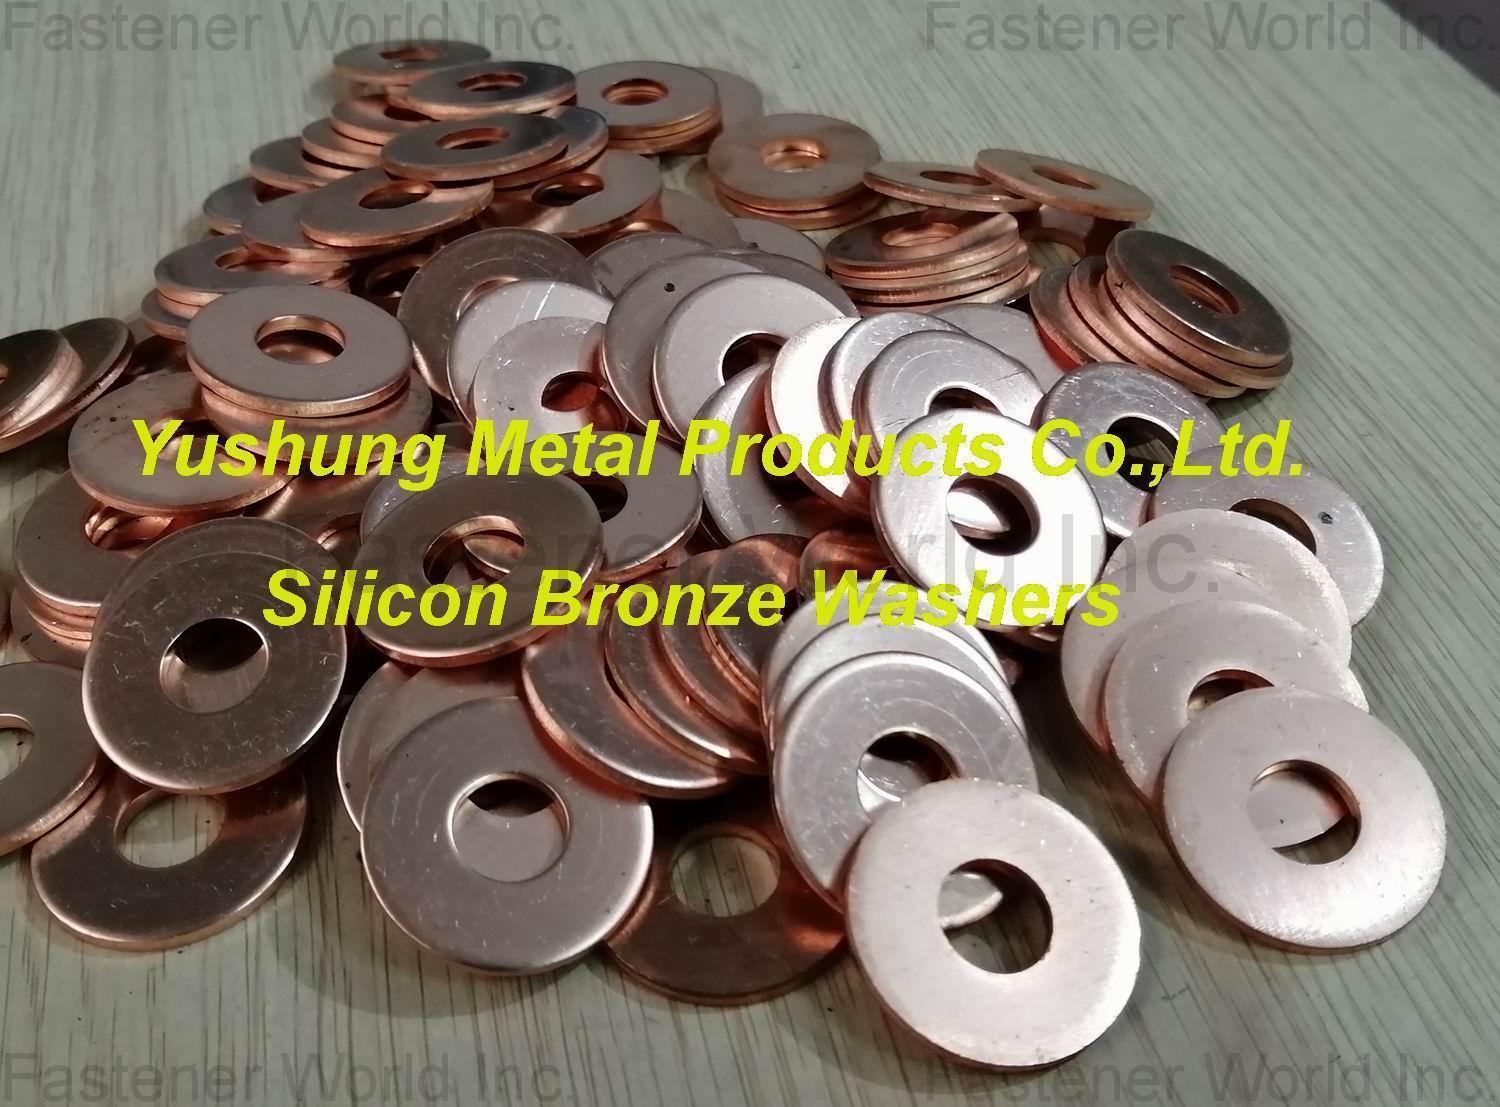 YUSHUNG METAL PRODUCTS CO., LTD. , Bronze washers silicon bronze flat washers